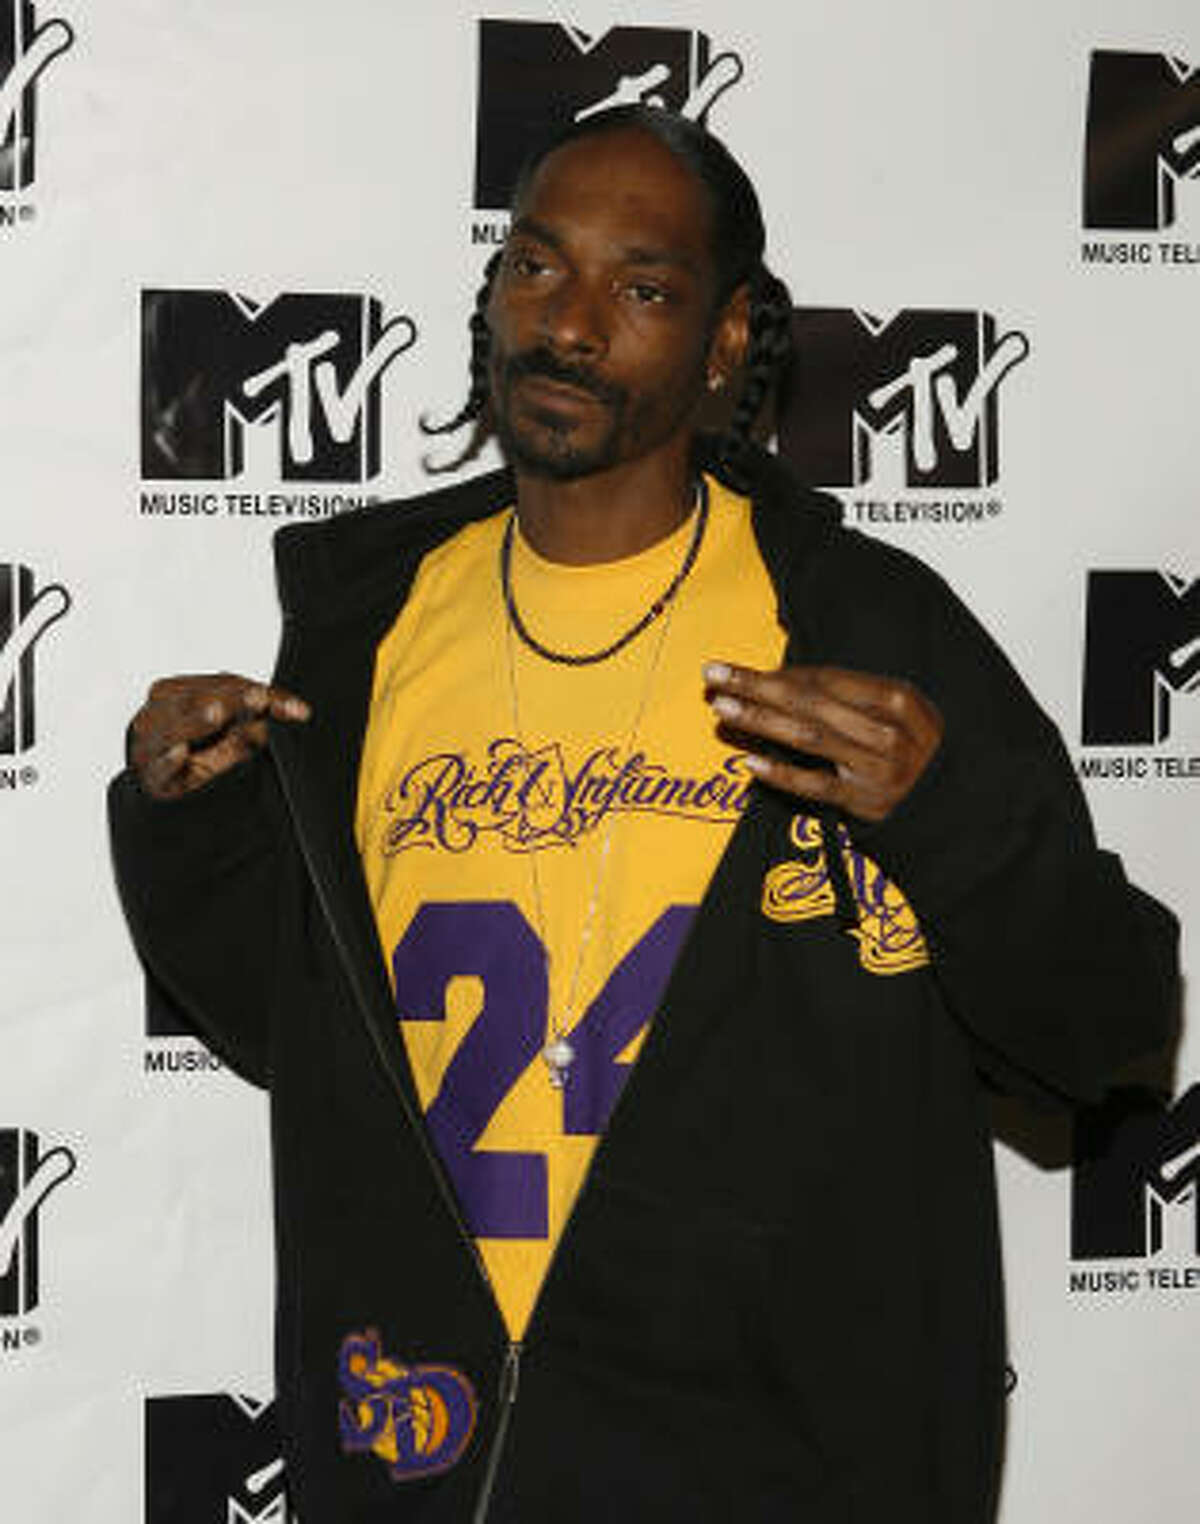 snoopdogg: "little homies rippn it on twizzle... yezzziirrr!!!!" Catch up on your celebrity news.